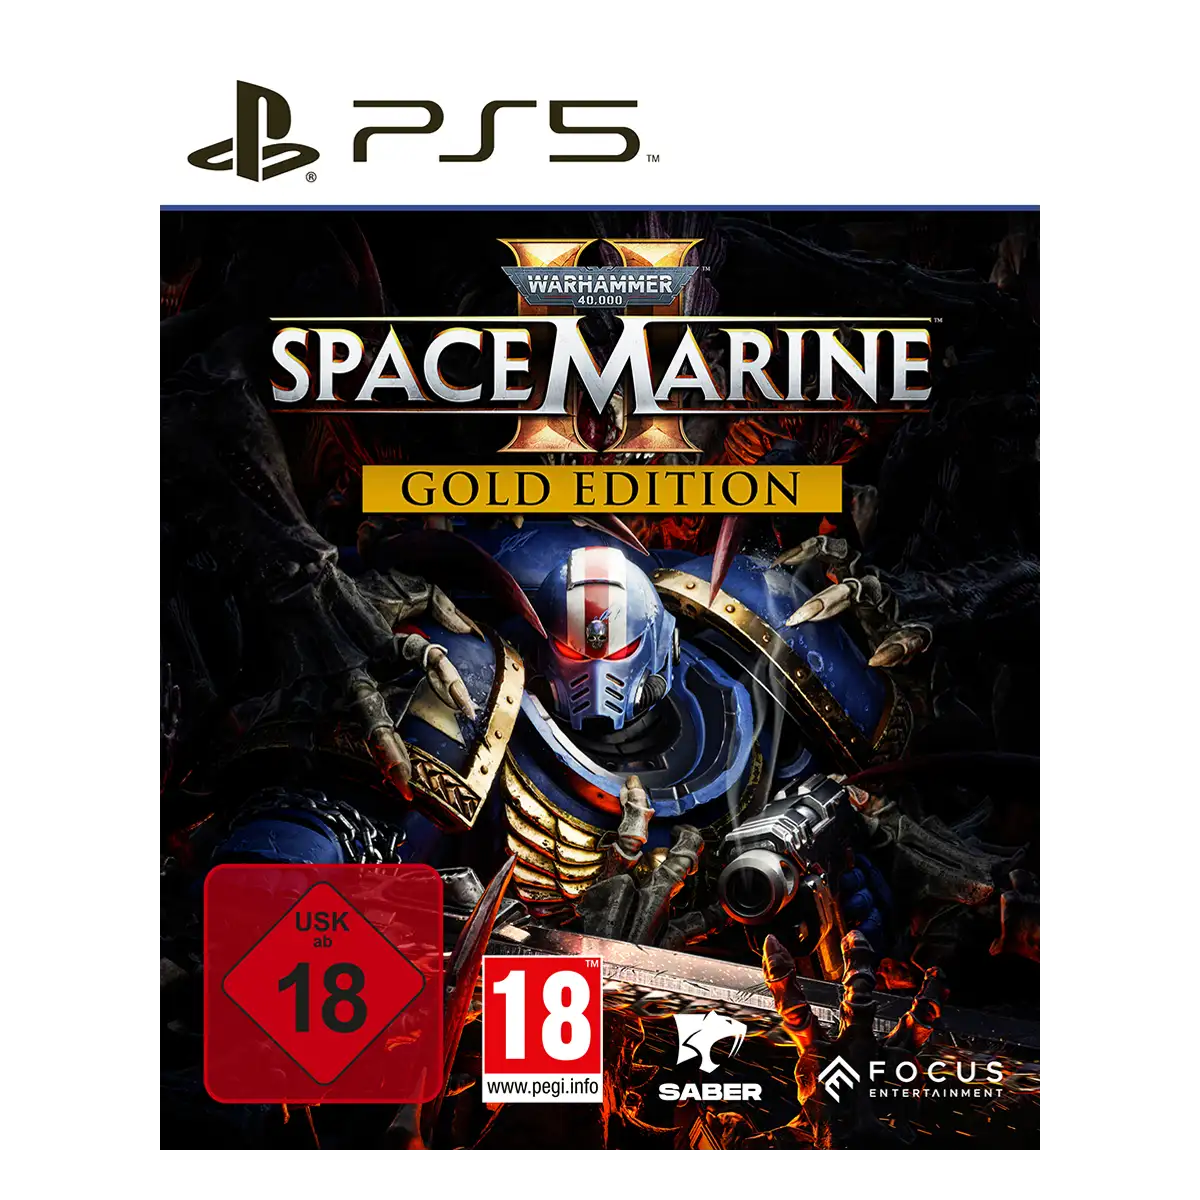 Warhammer 40,000: Space Marine 2 Gold Edition (PS5) Image 2